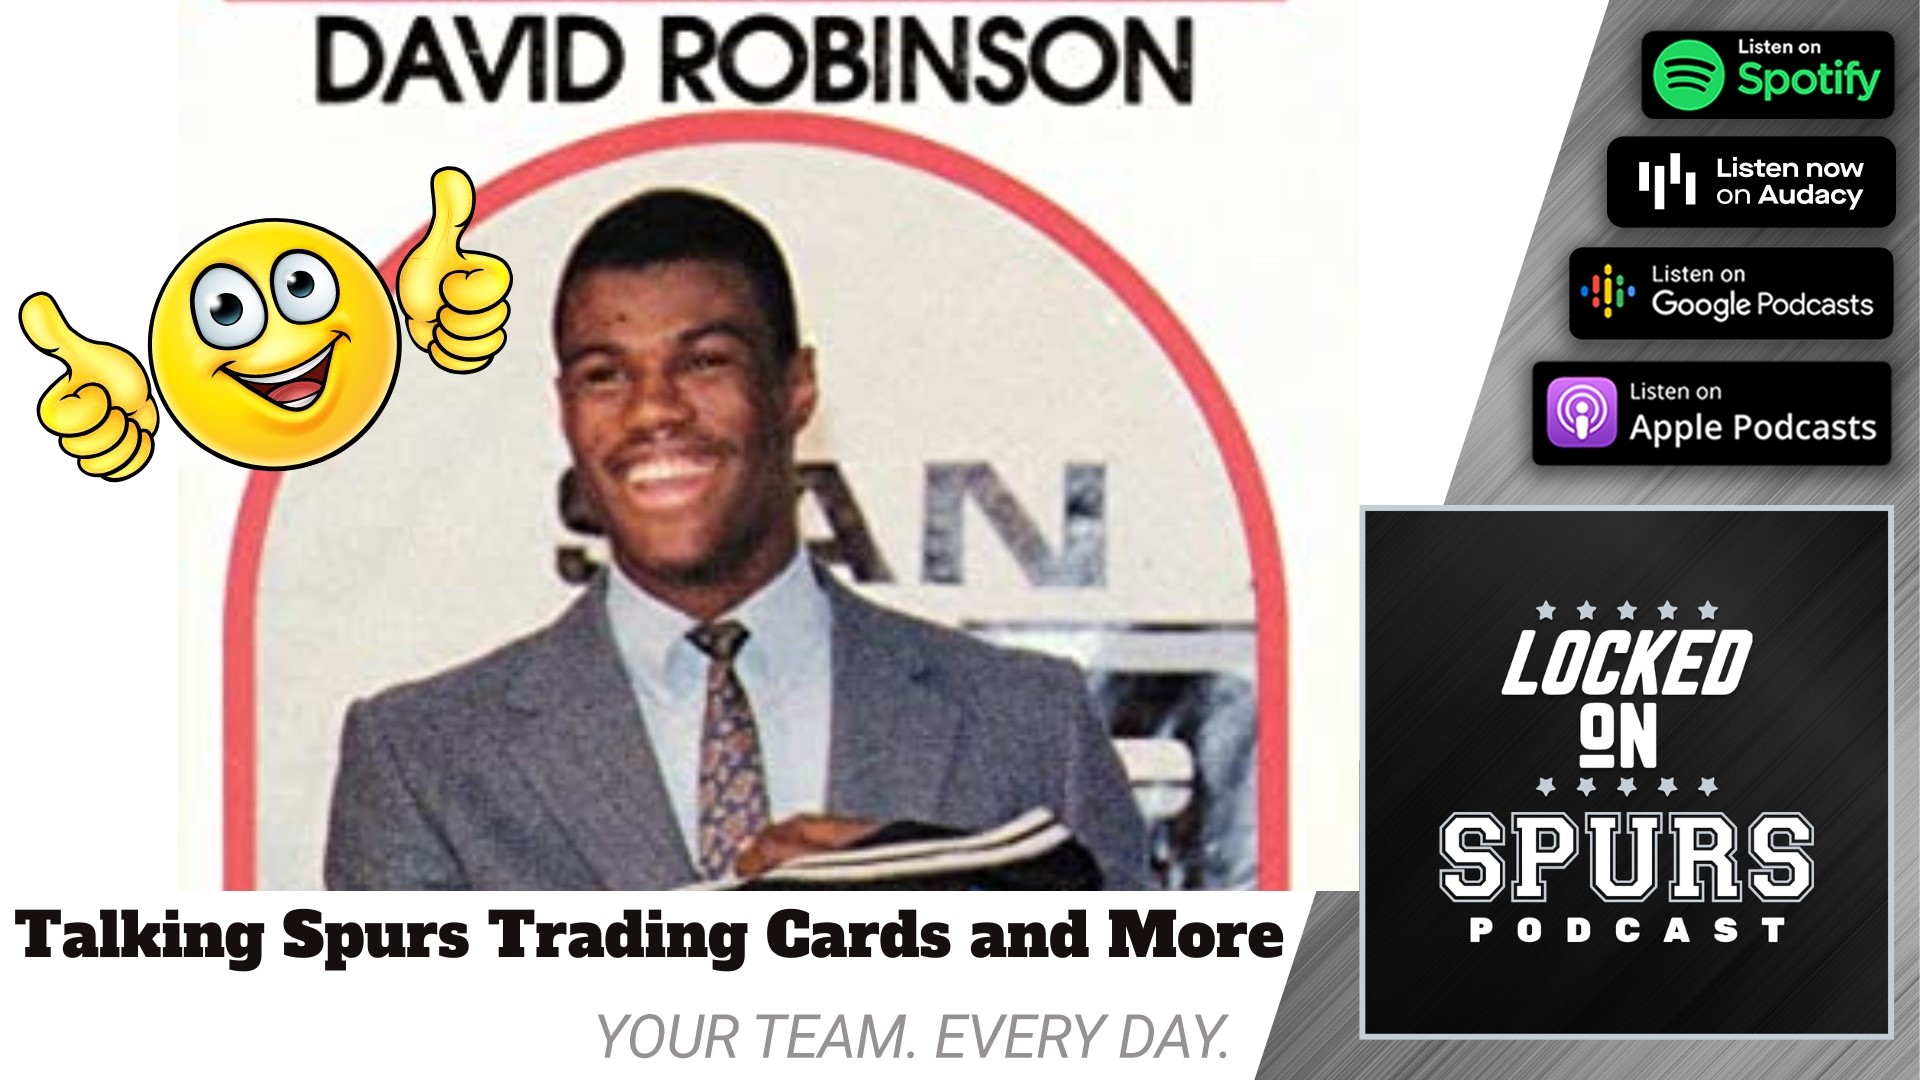 Check to see if you might have some valuable Spurs basketball cards.